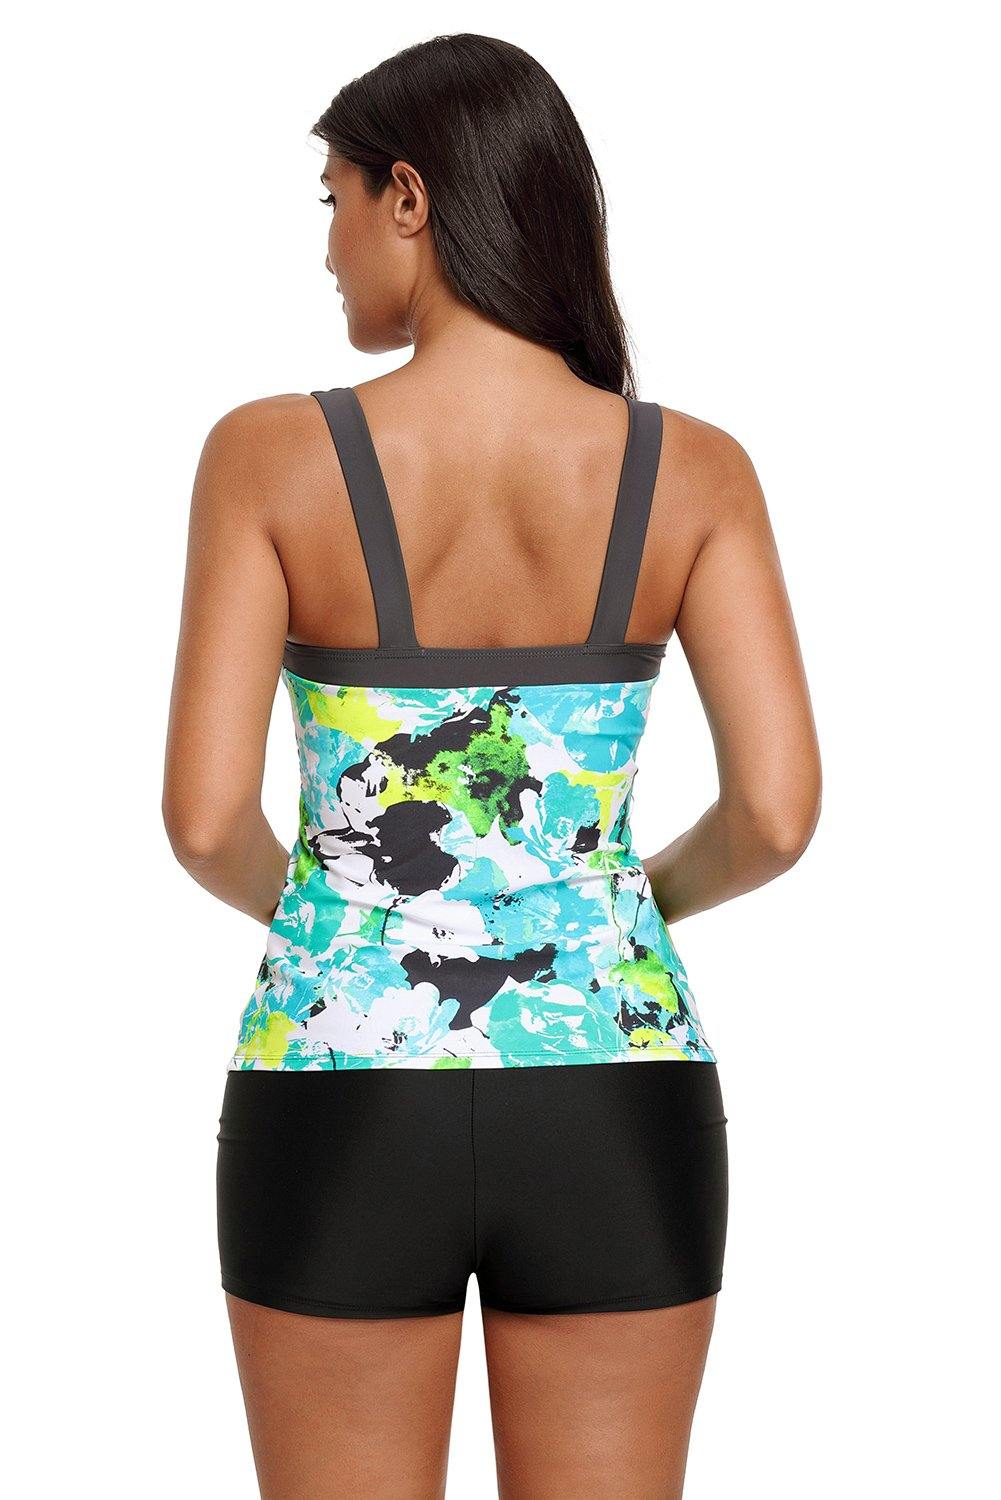 Abstract Printed Camisole Tankini Top - L & M Kee, LLC